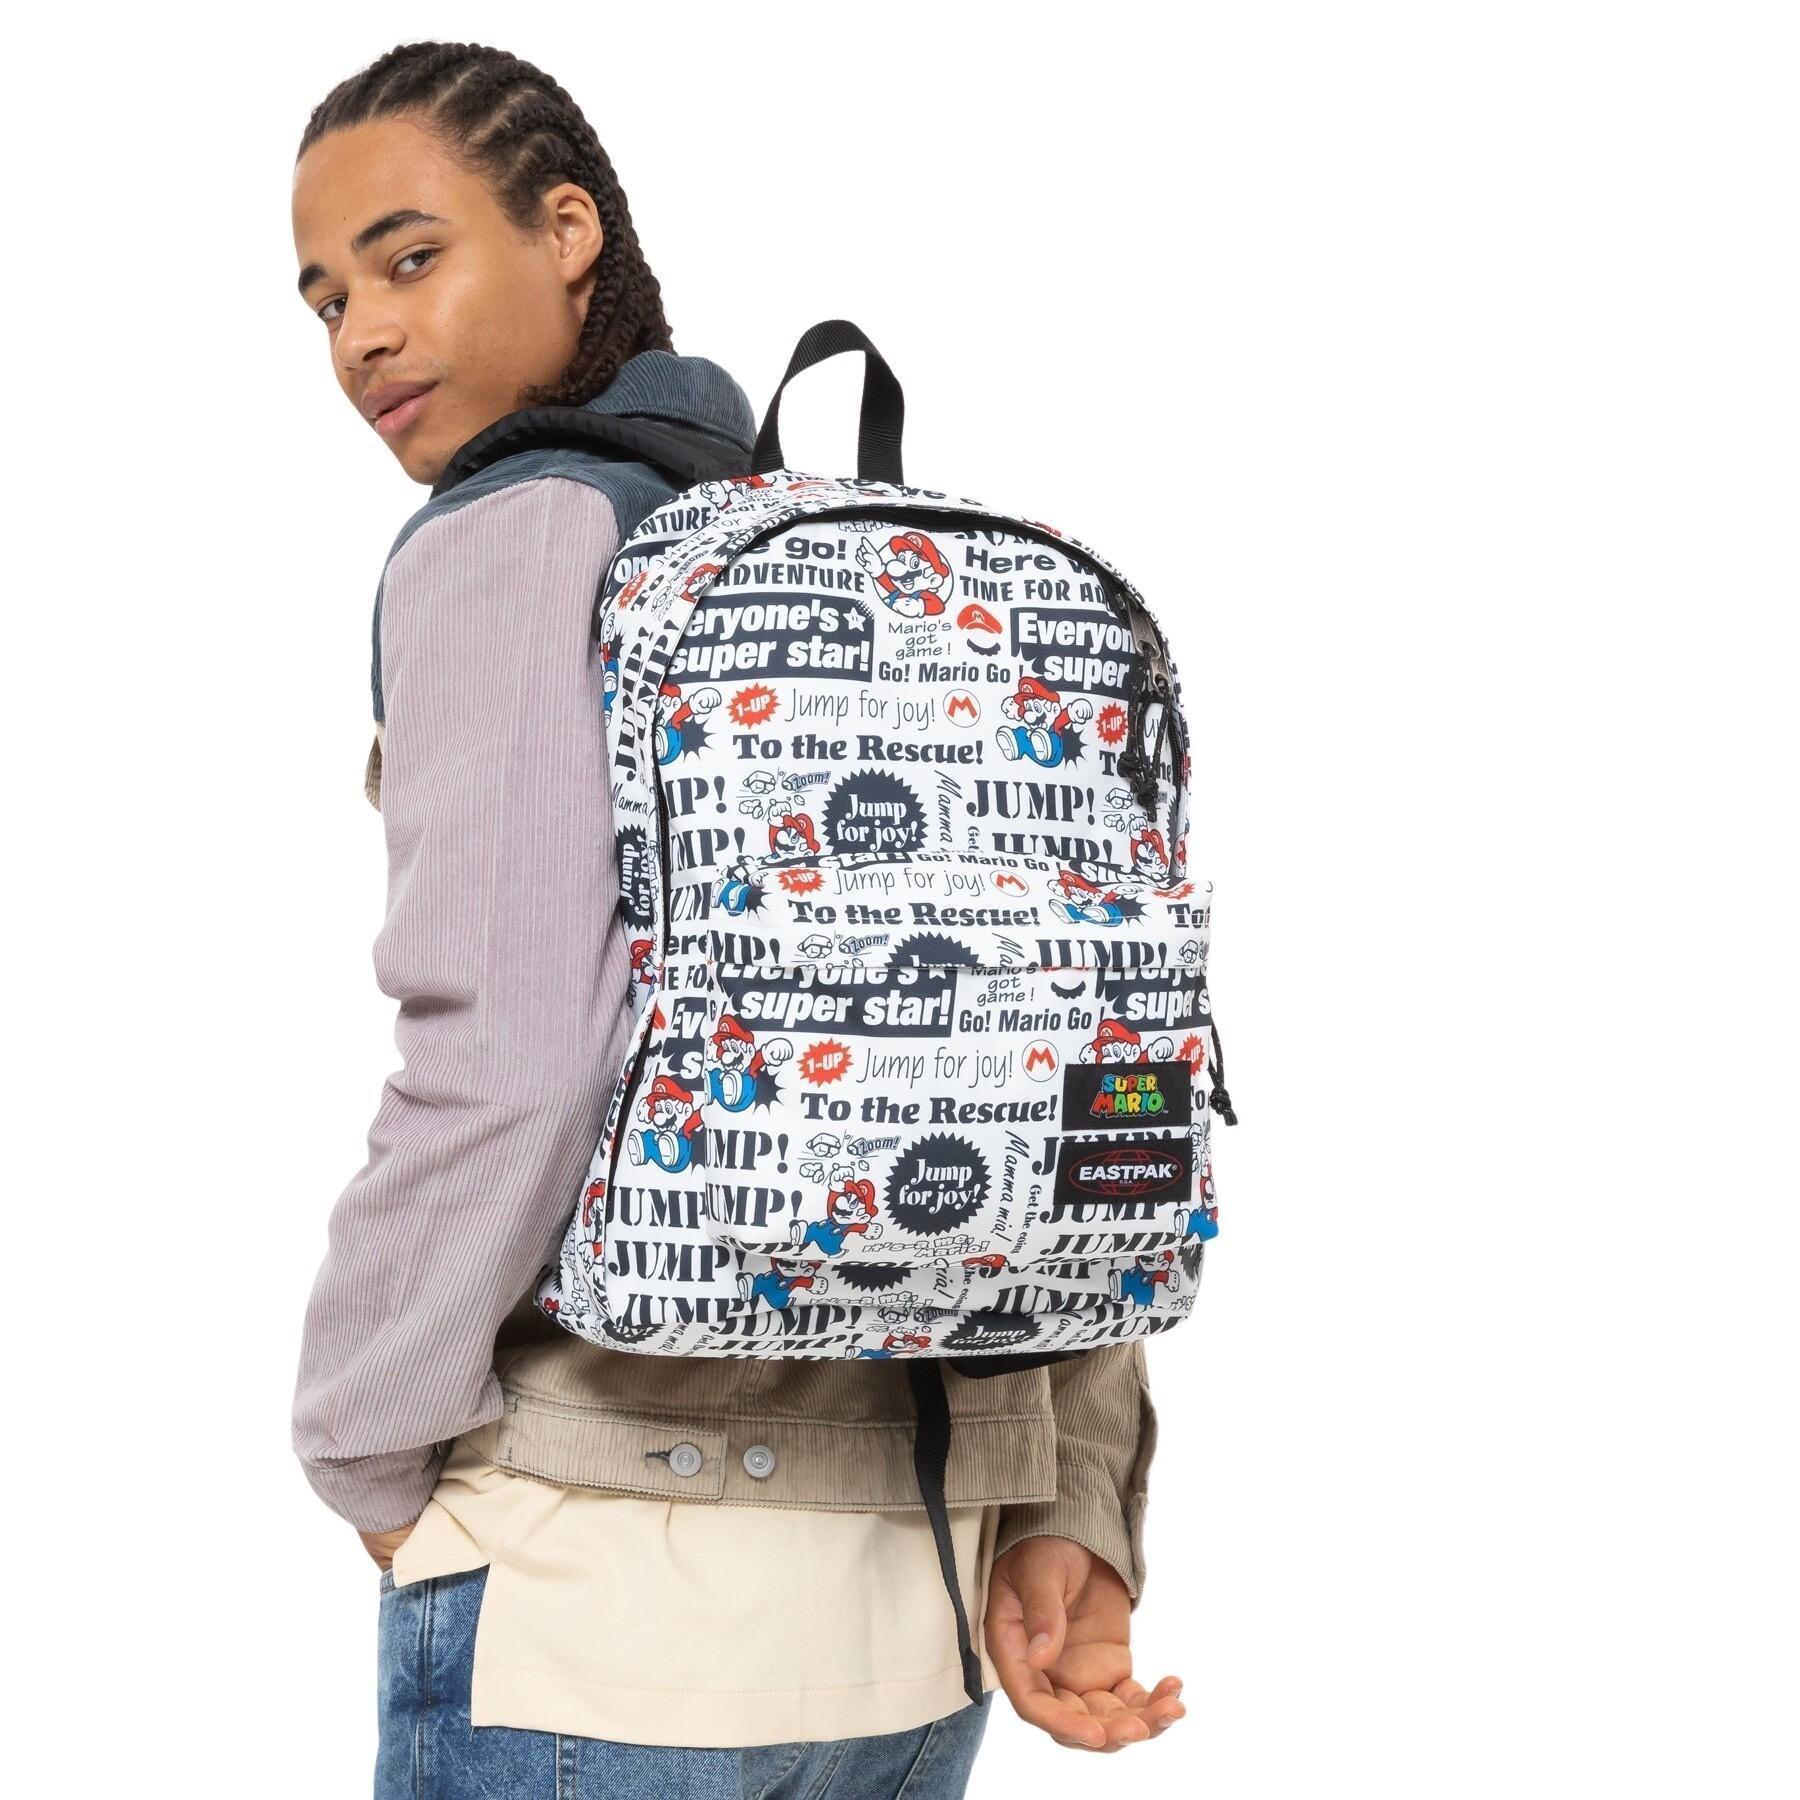 Backpack Eastpak Out of Office